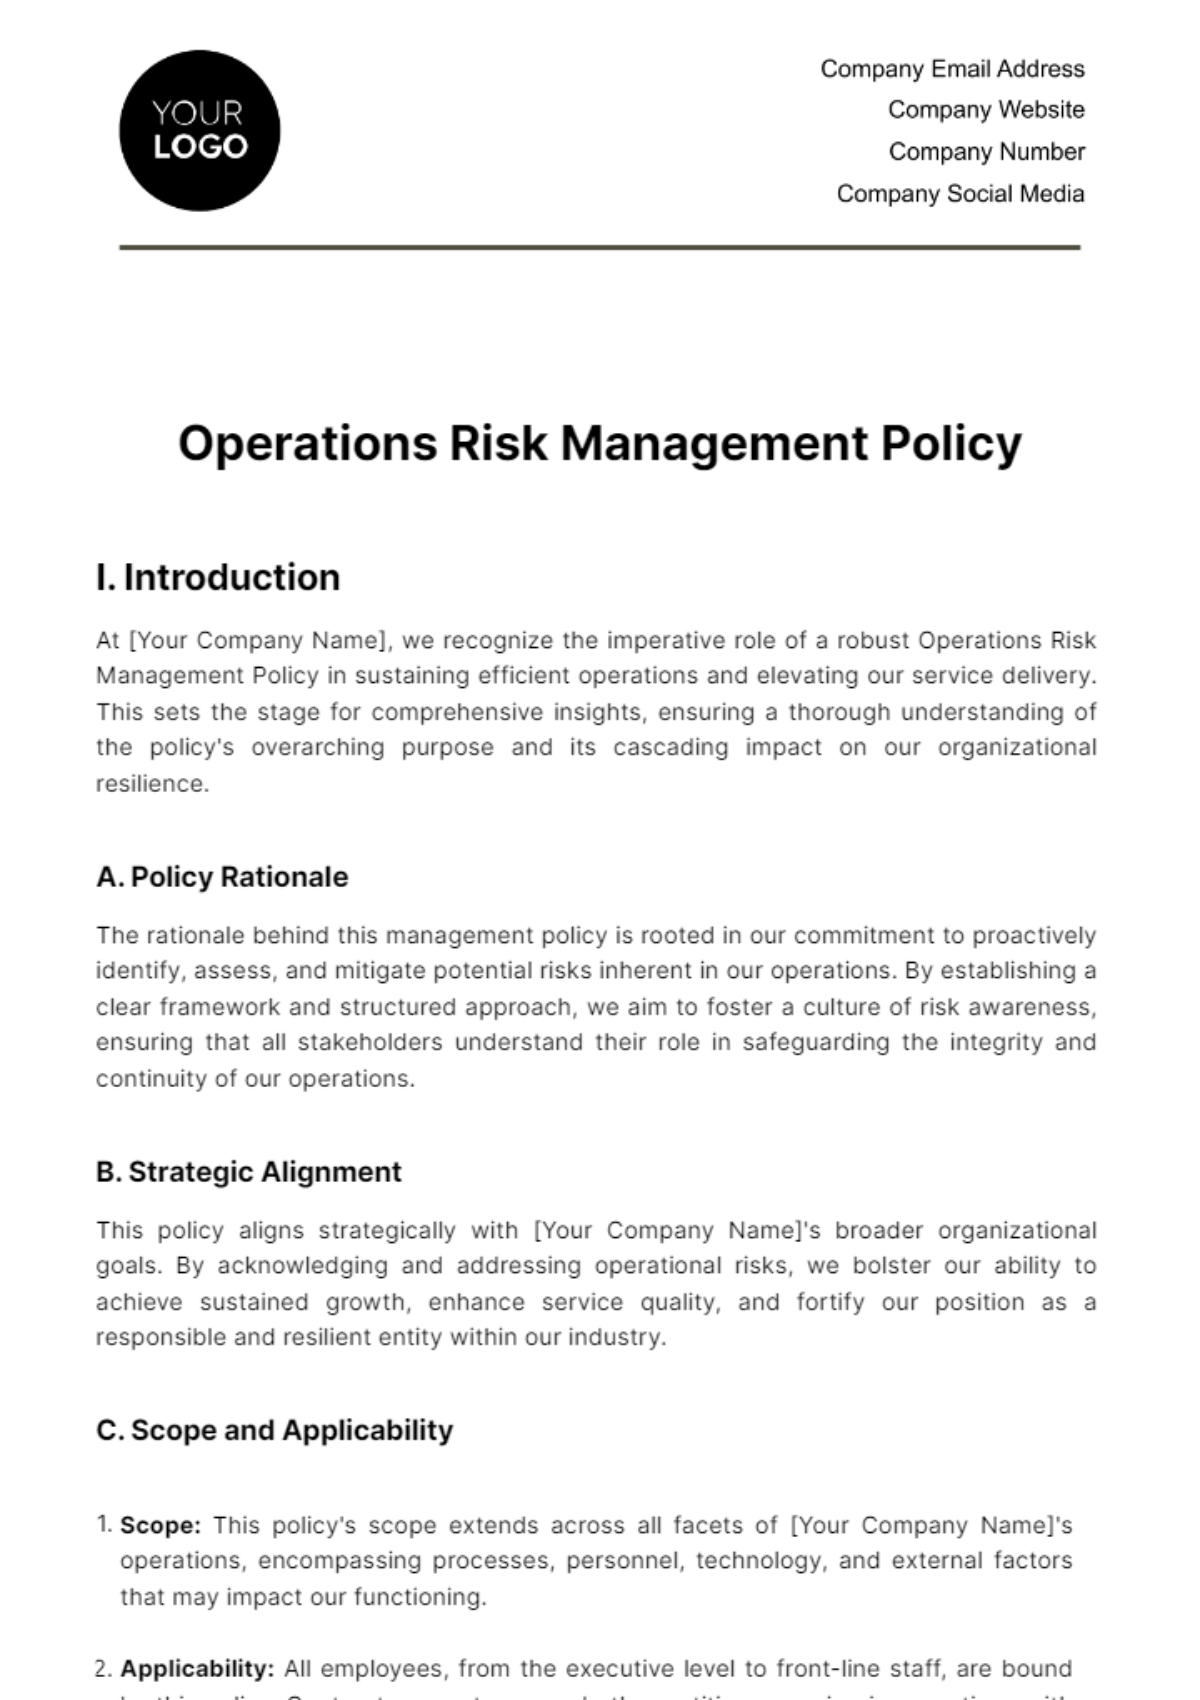 Free Operations Risk Management Policy Template